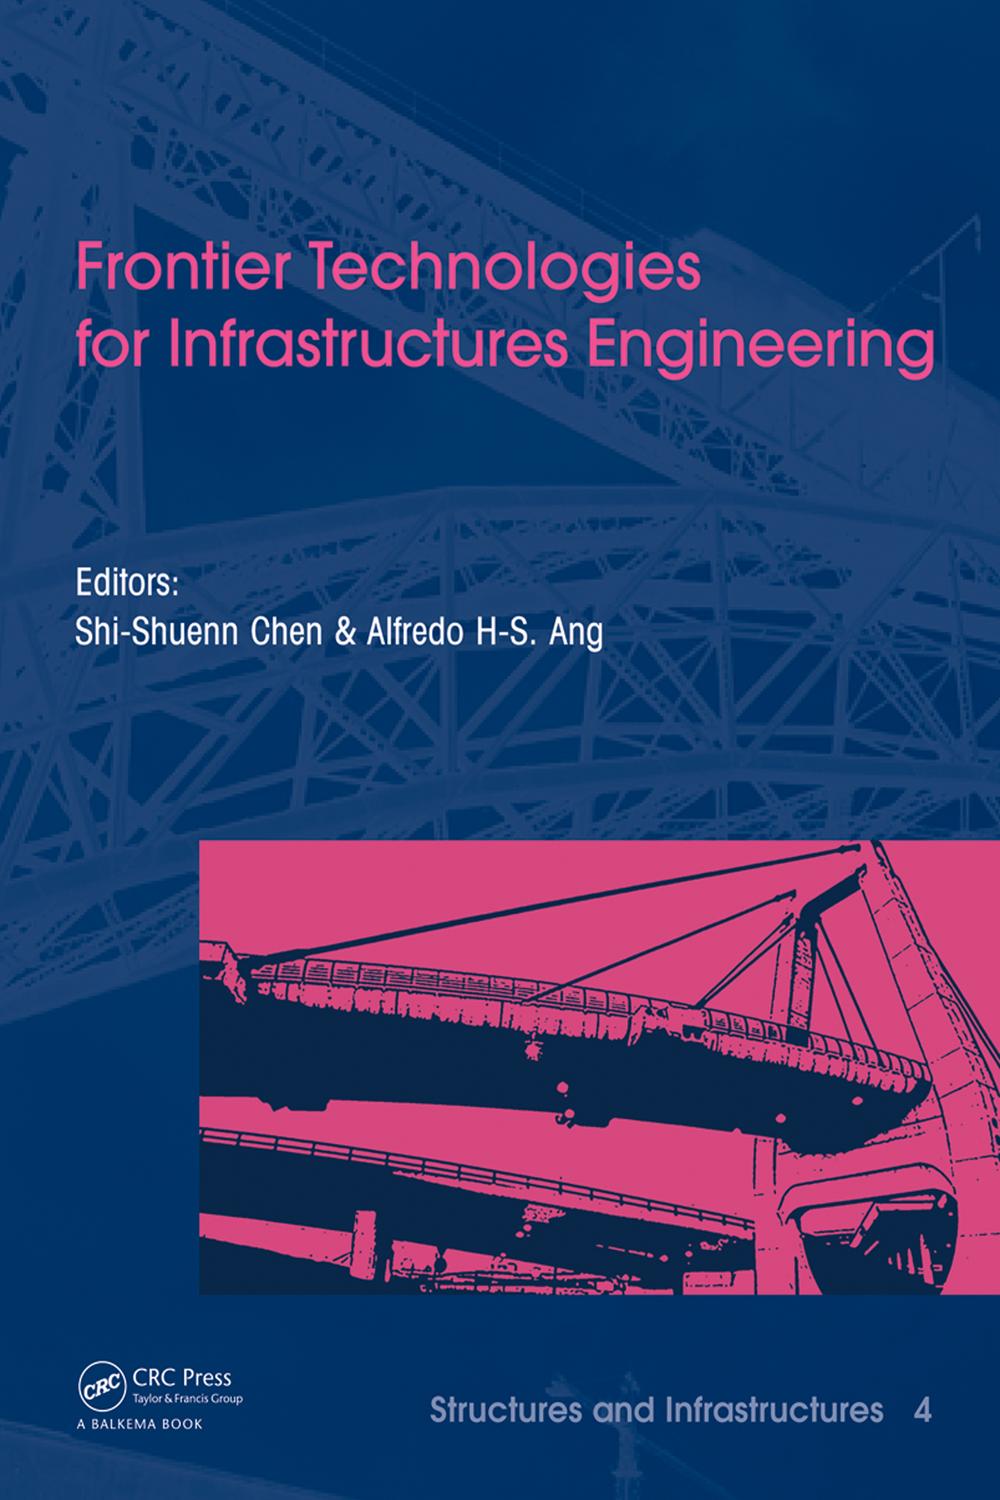 Frontier Technologies for Infrastructures Engineering - Alfredo H.S. Ang, Shi-Shuenn Chen